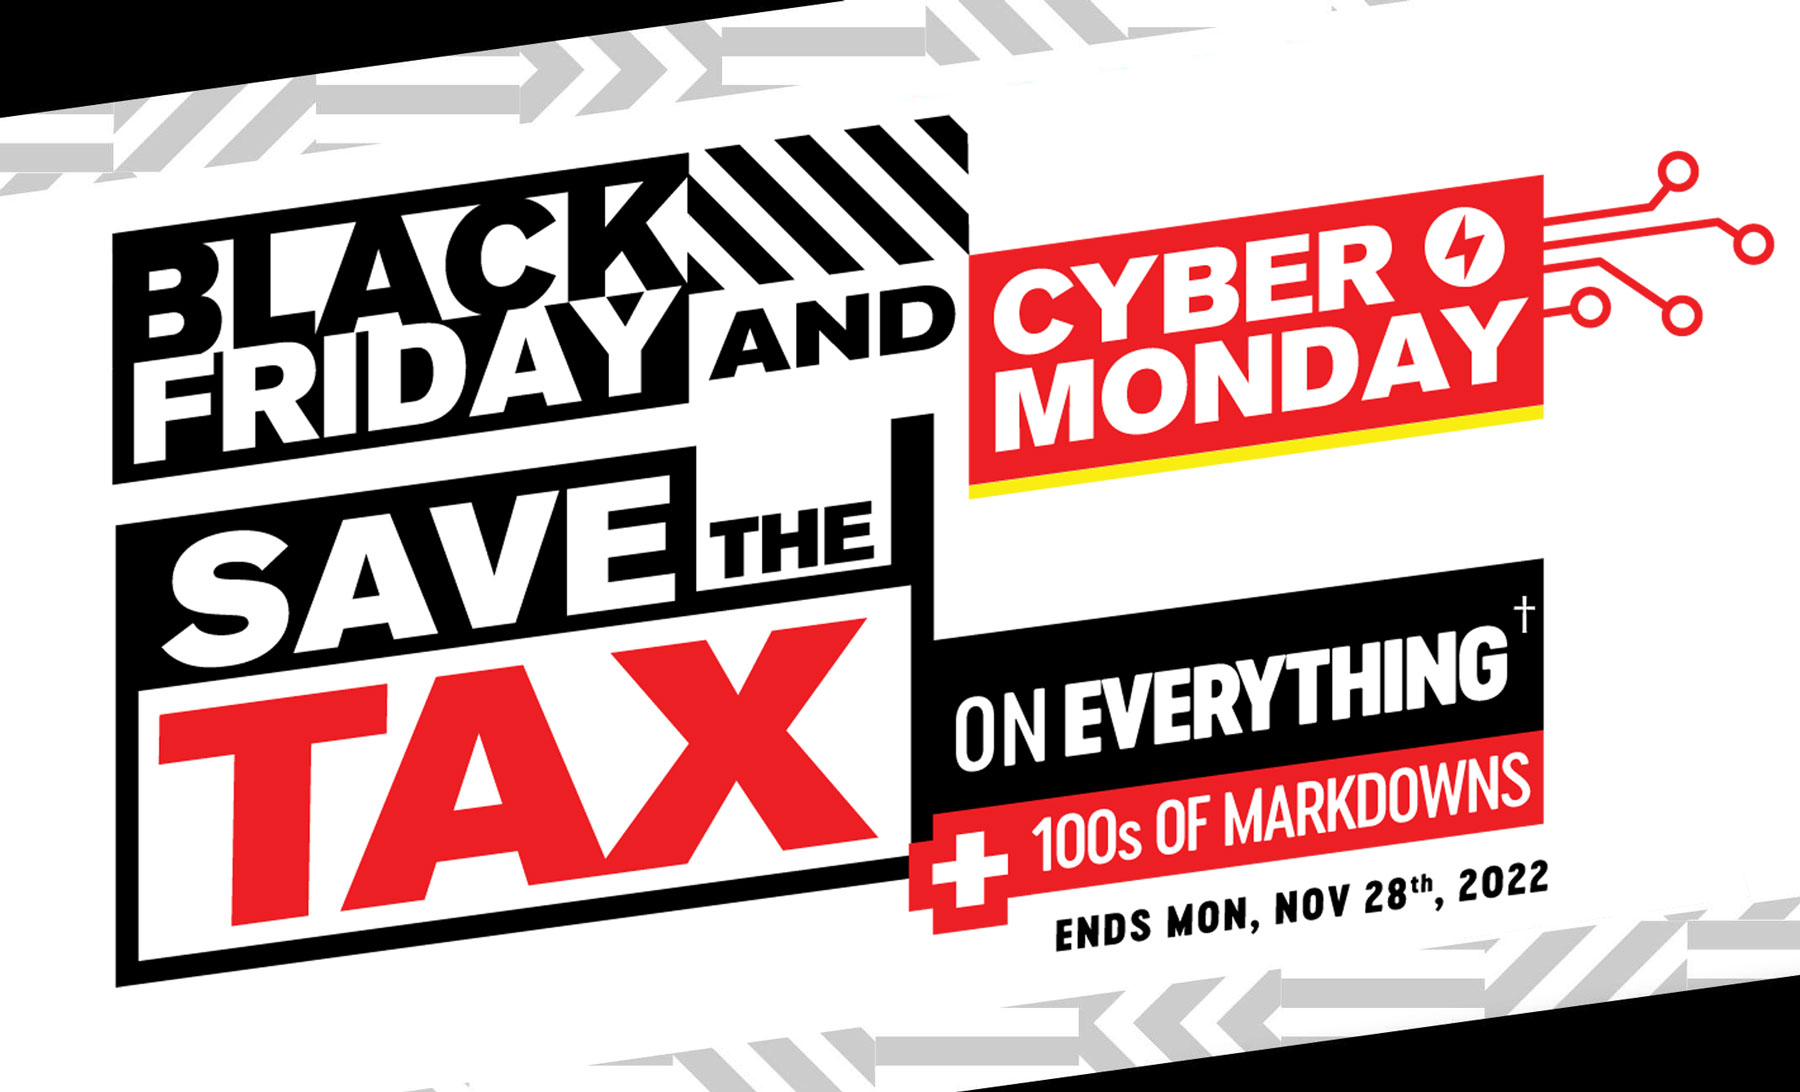 Black Friday - Save the Tax on everything*